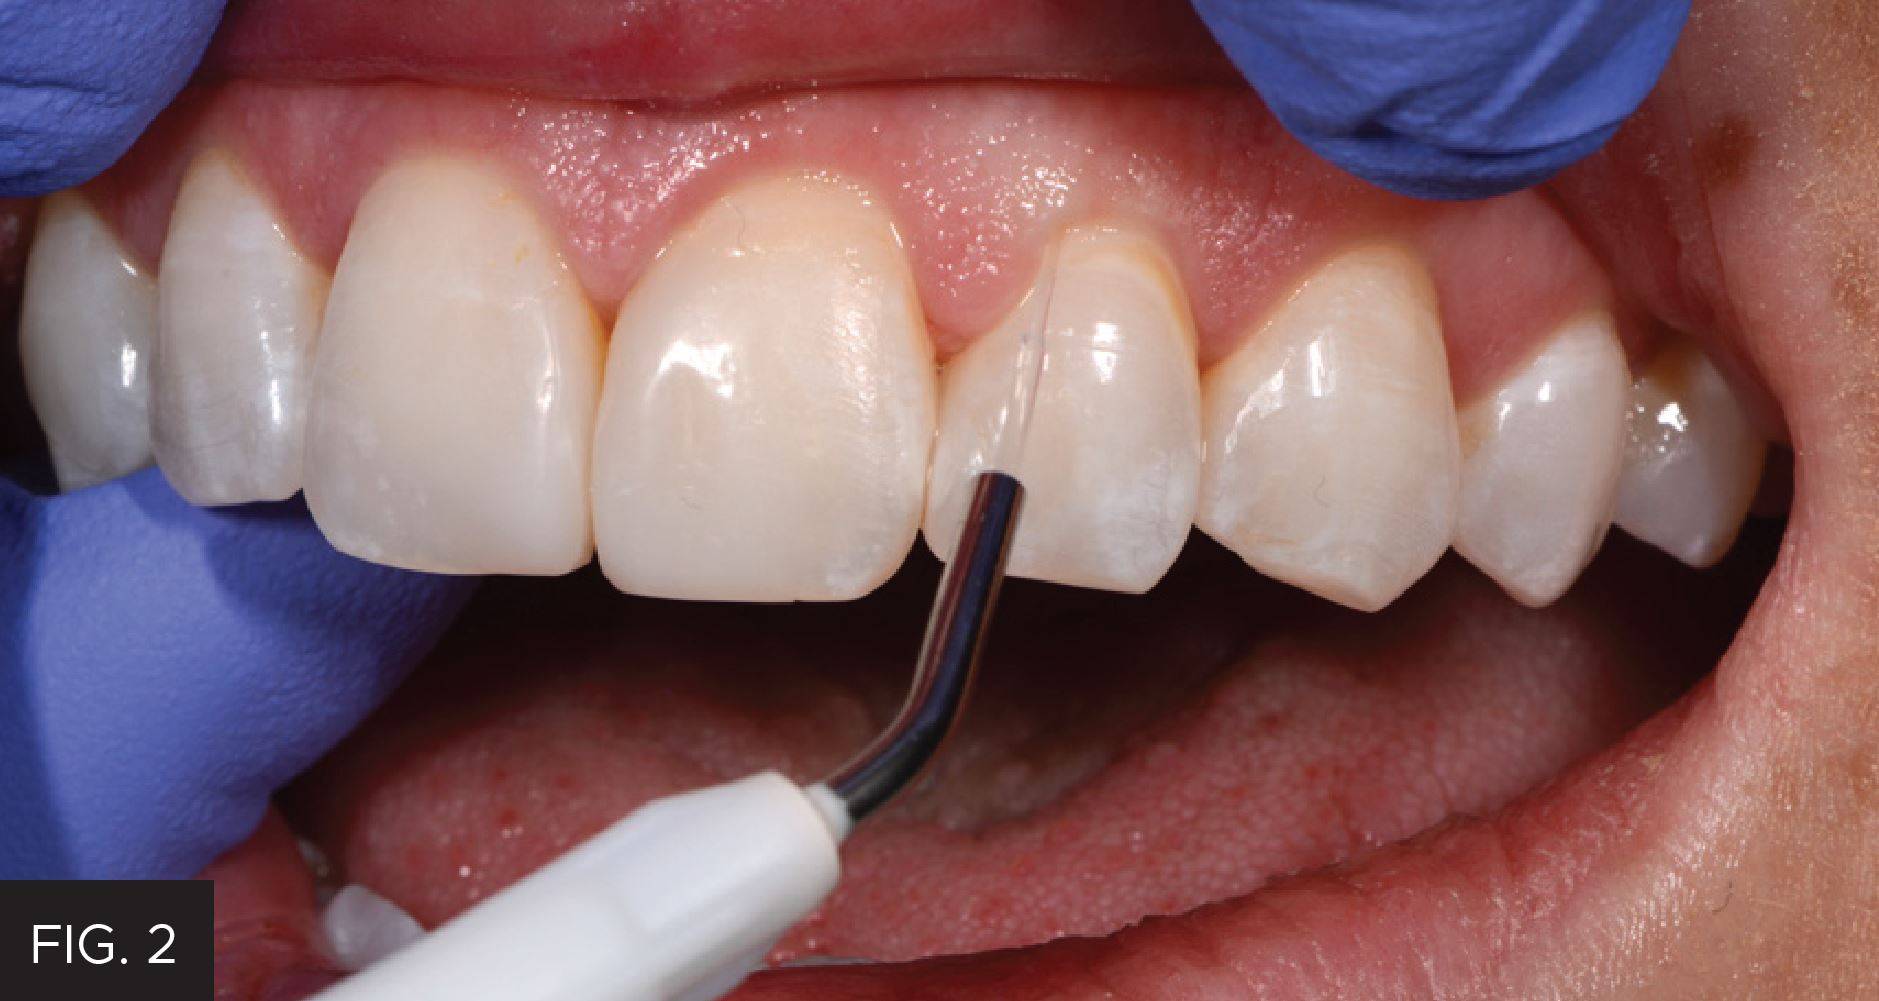 Gingival Sculpting With a Soft Tissue Diode Laser: Figure 2